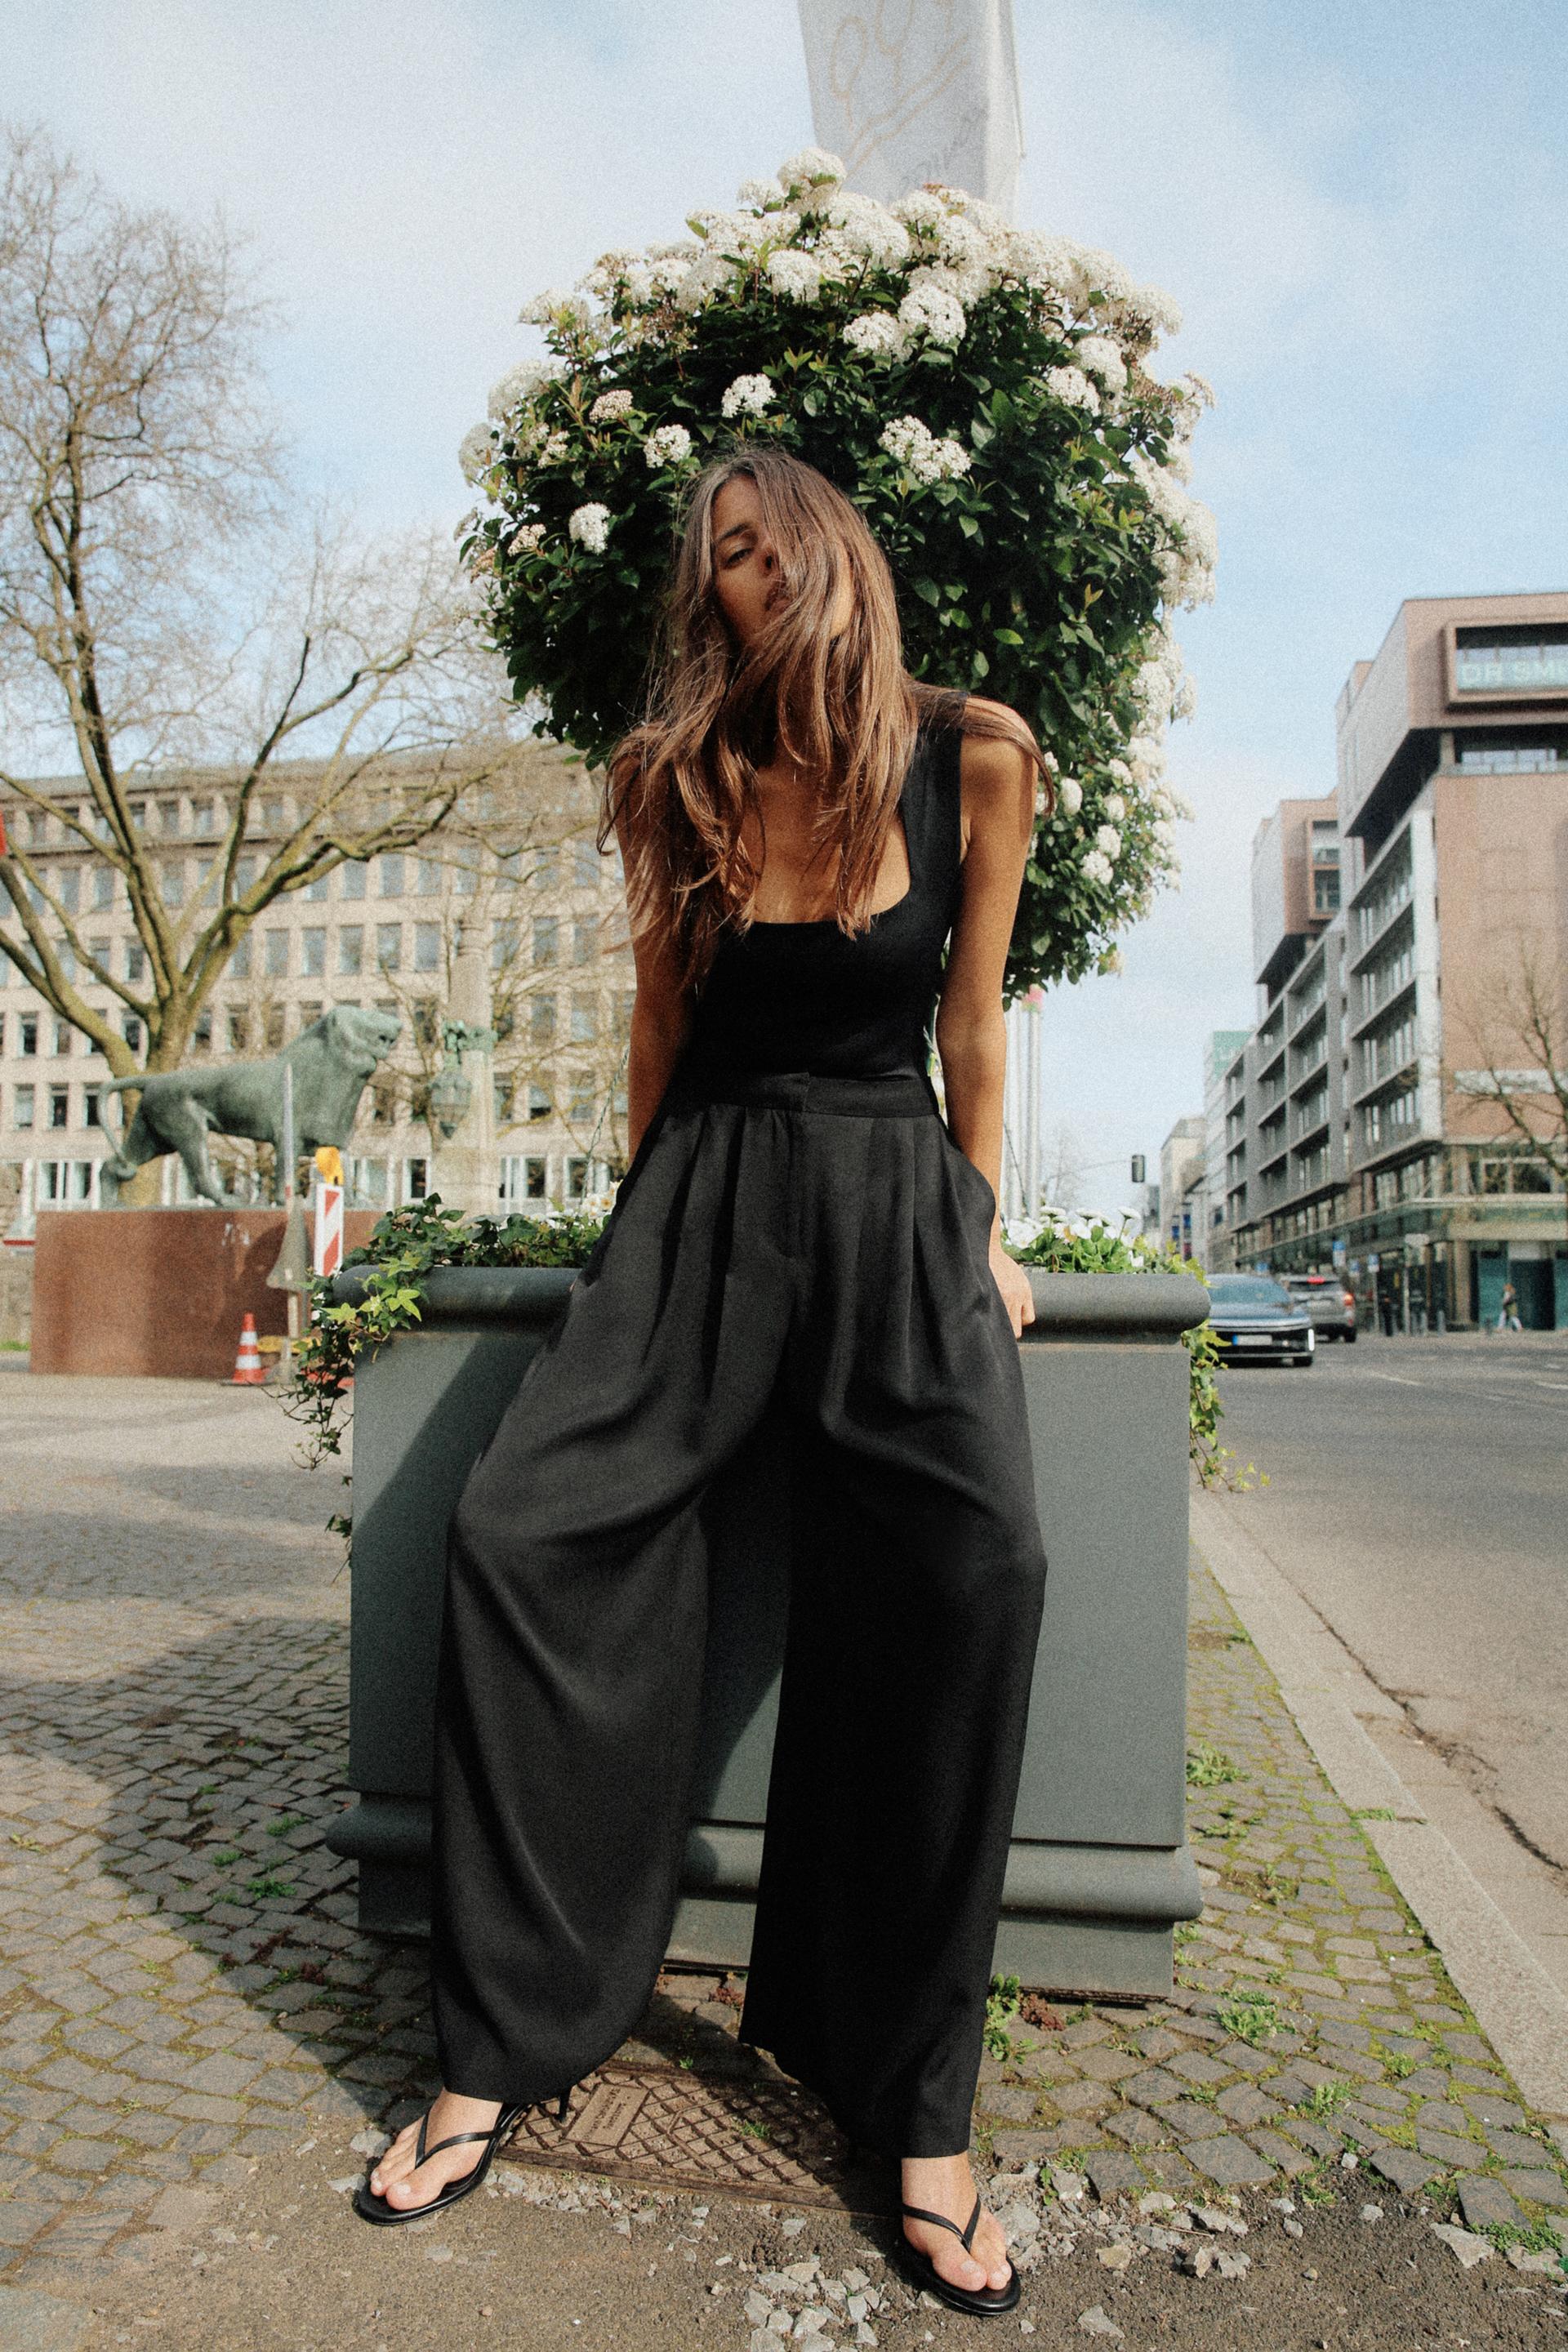 DARTED WIDE-LEG TROUSERS - Black